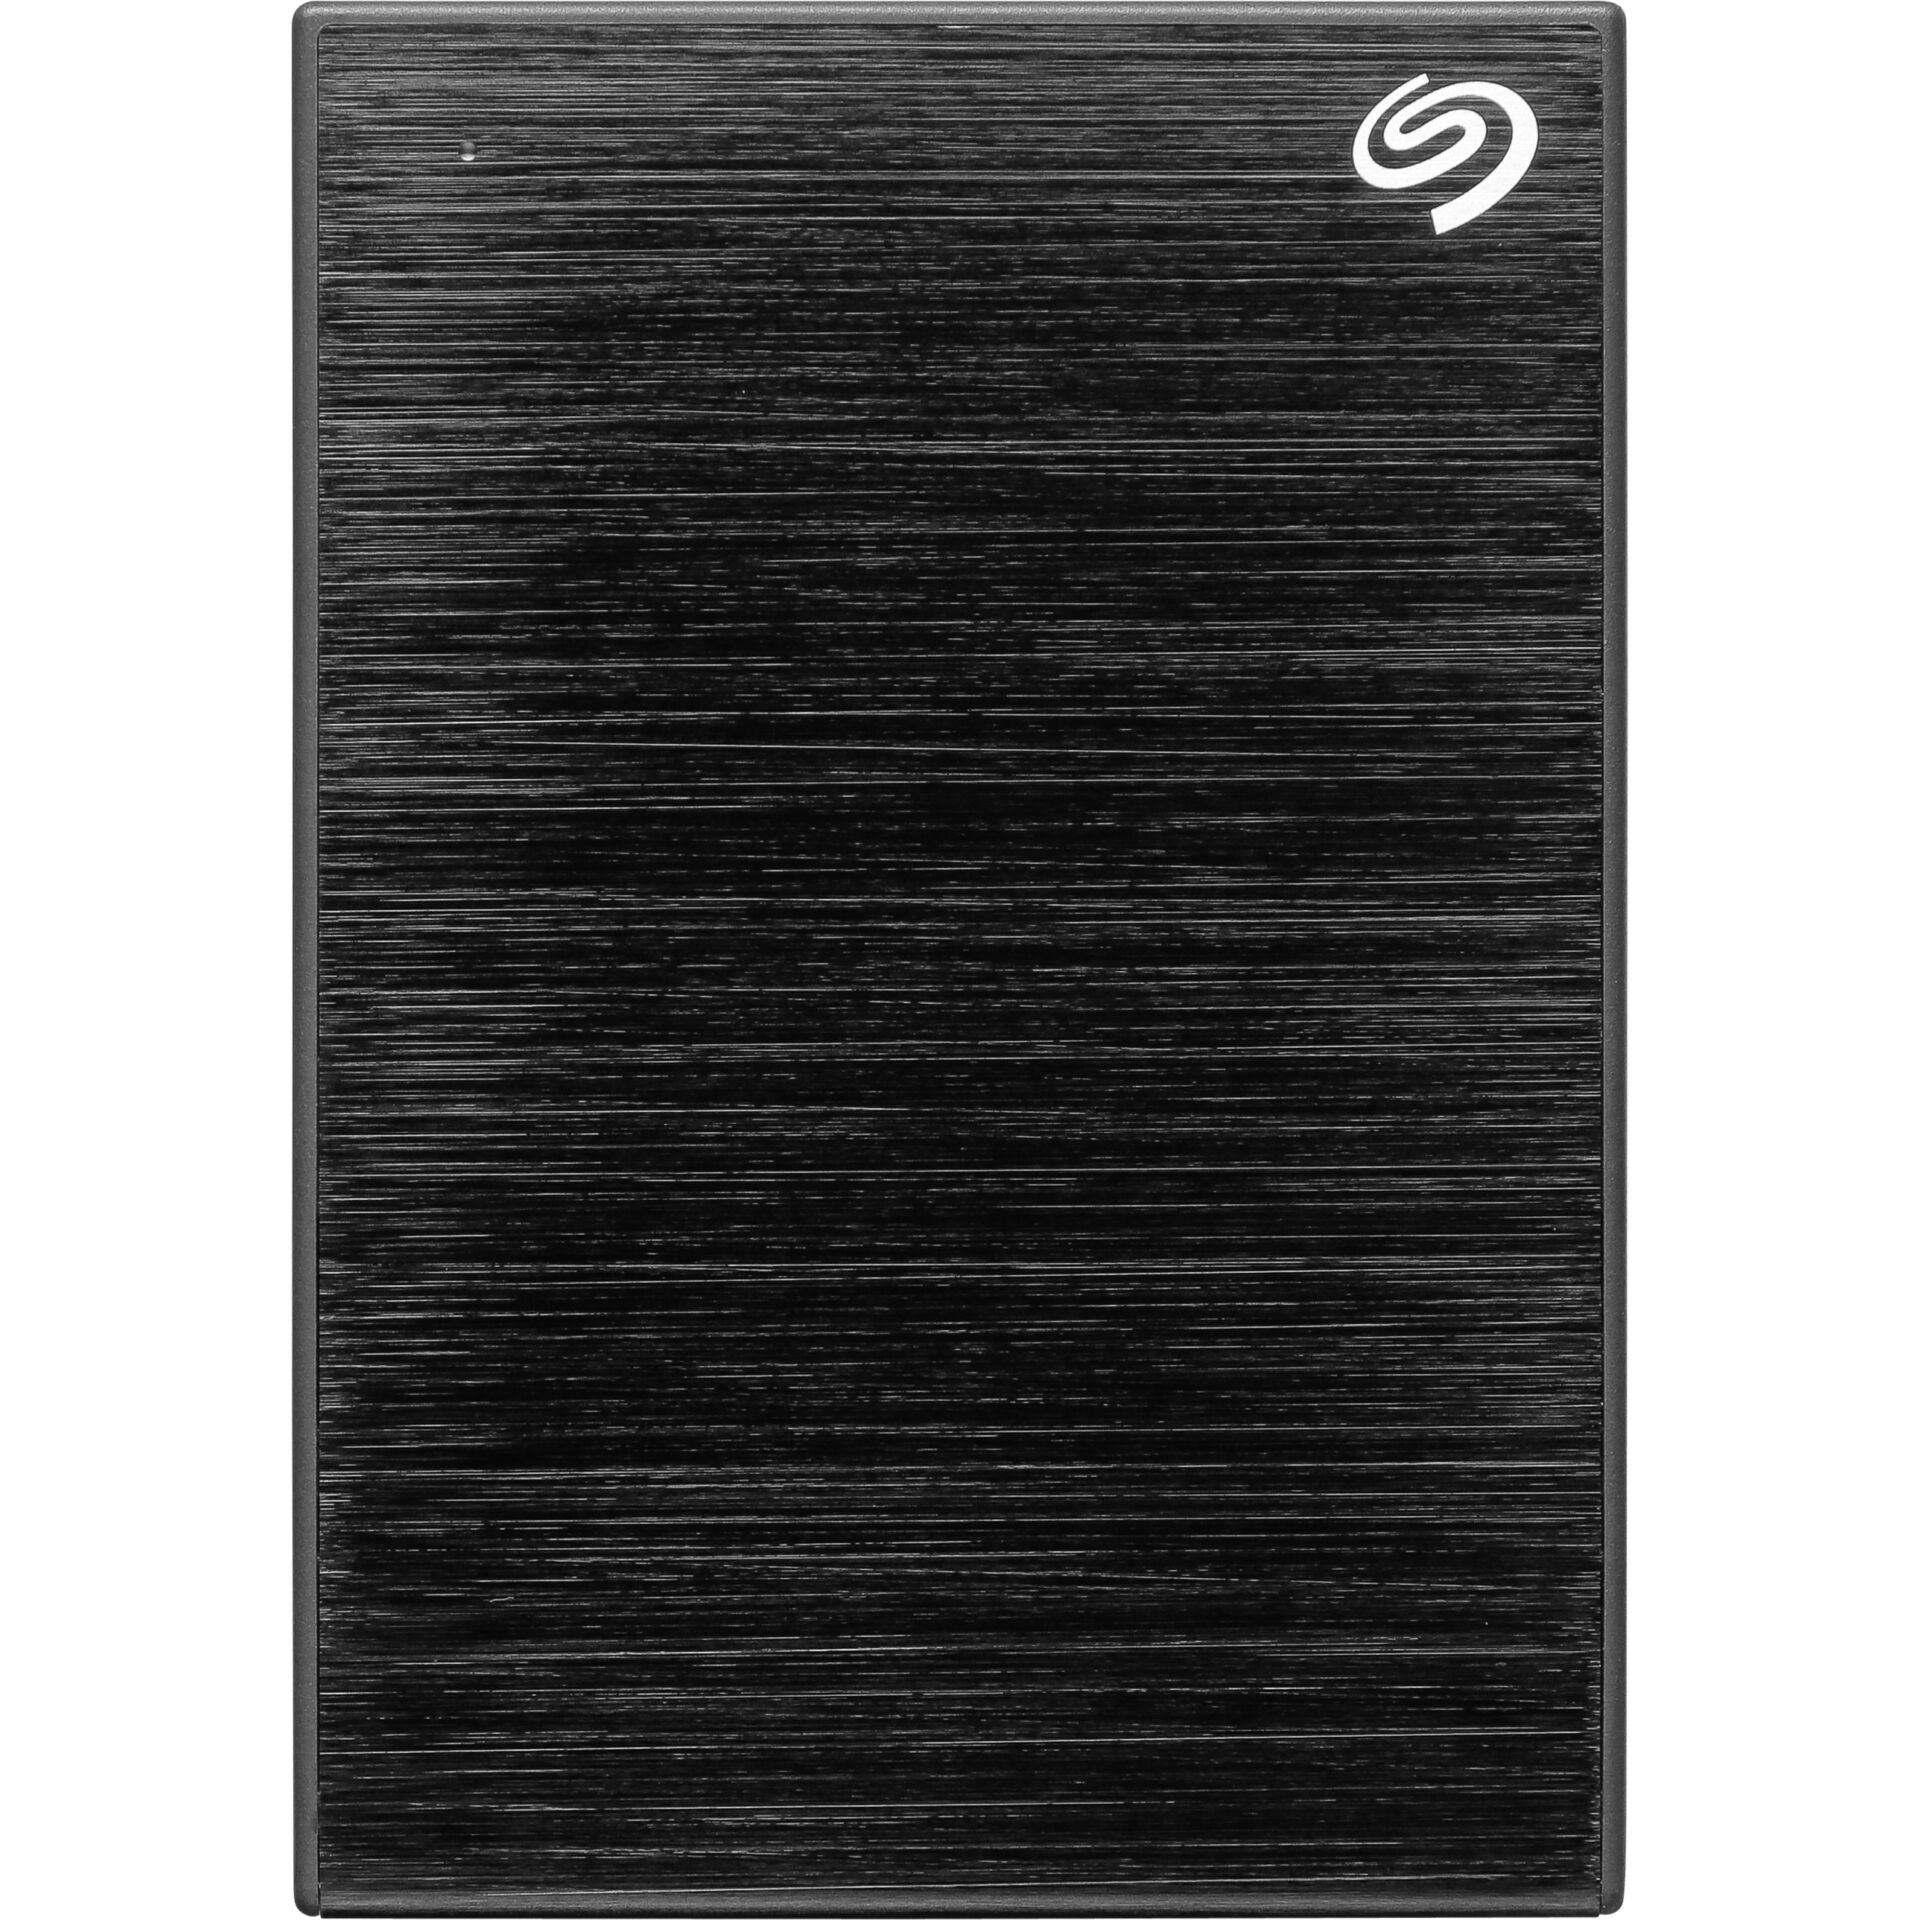 Festplatte -Externe Portable OneTouch Hardware/Electronic TB Seagate -Seagate 4